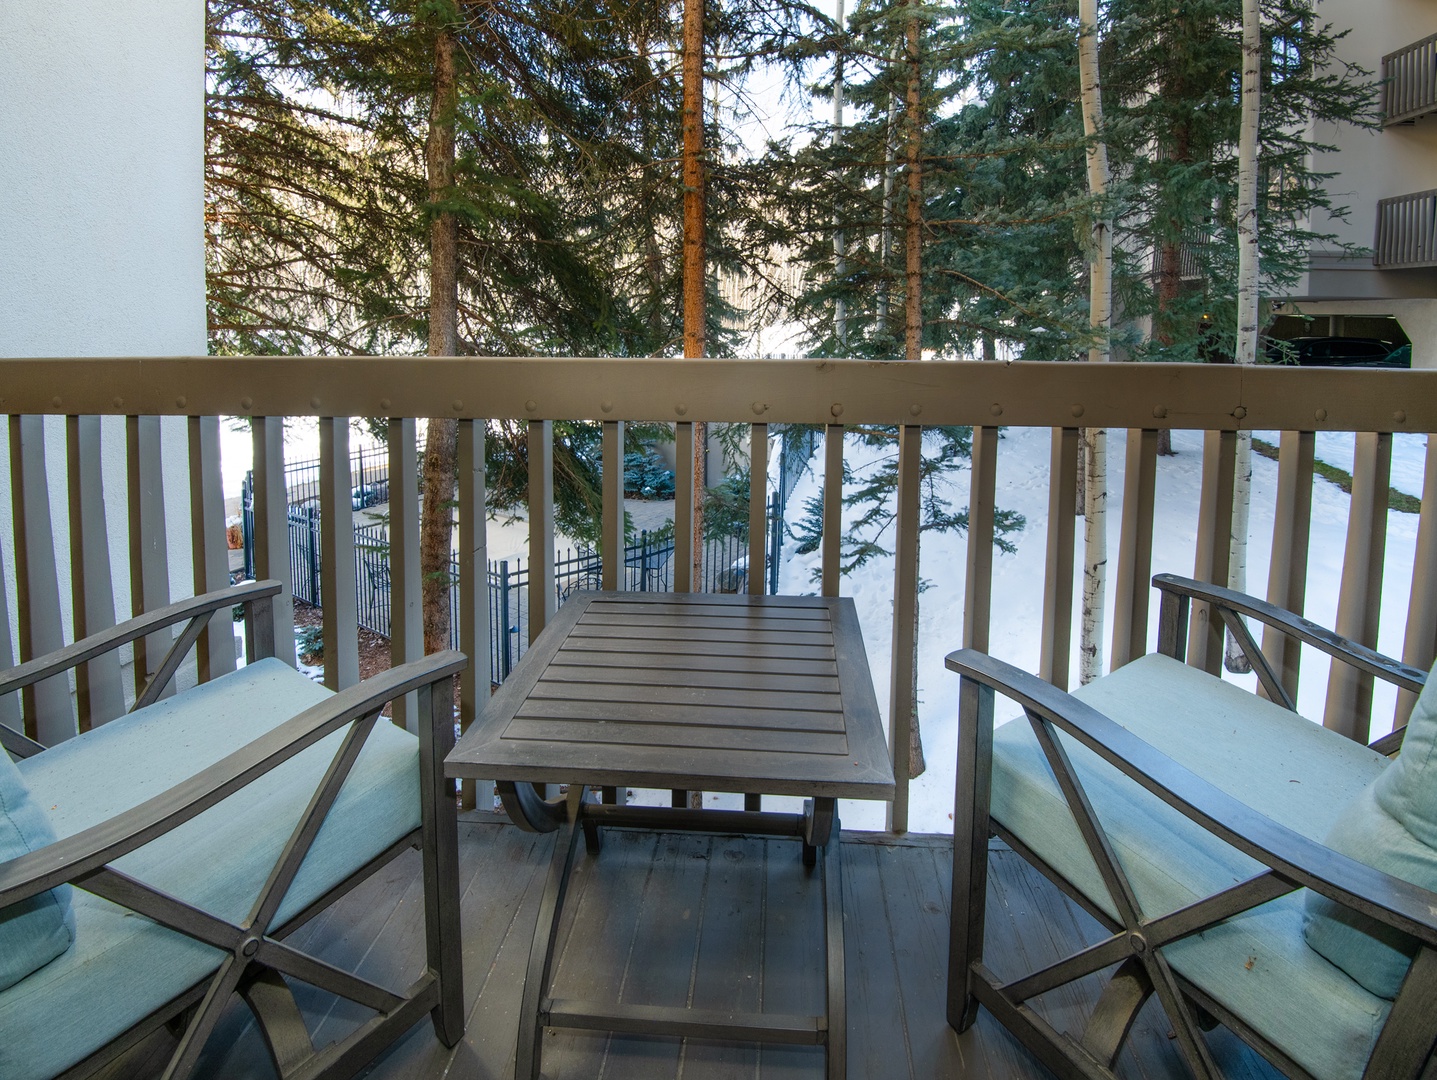 Immerse yourself in the crisp mountain air on the scenic balcony